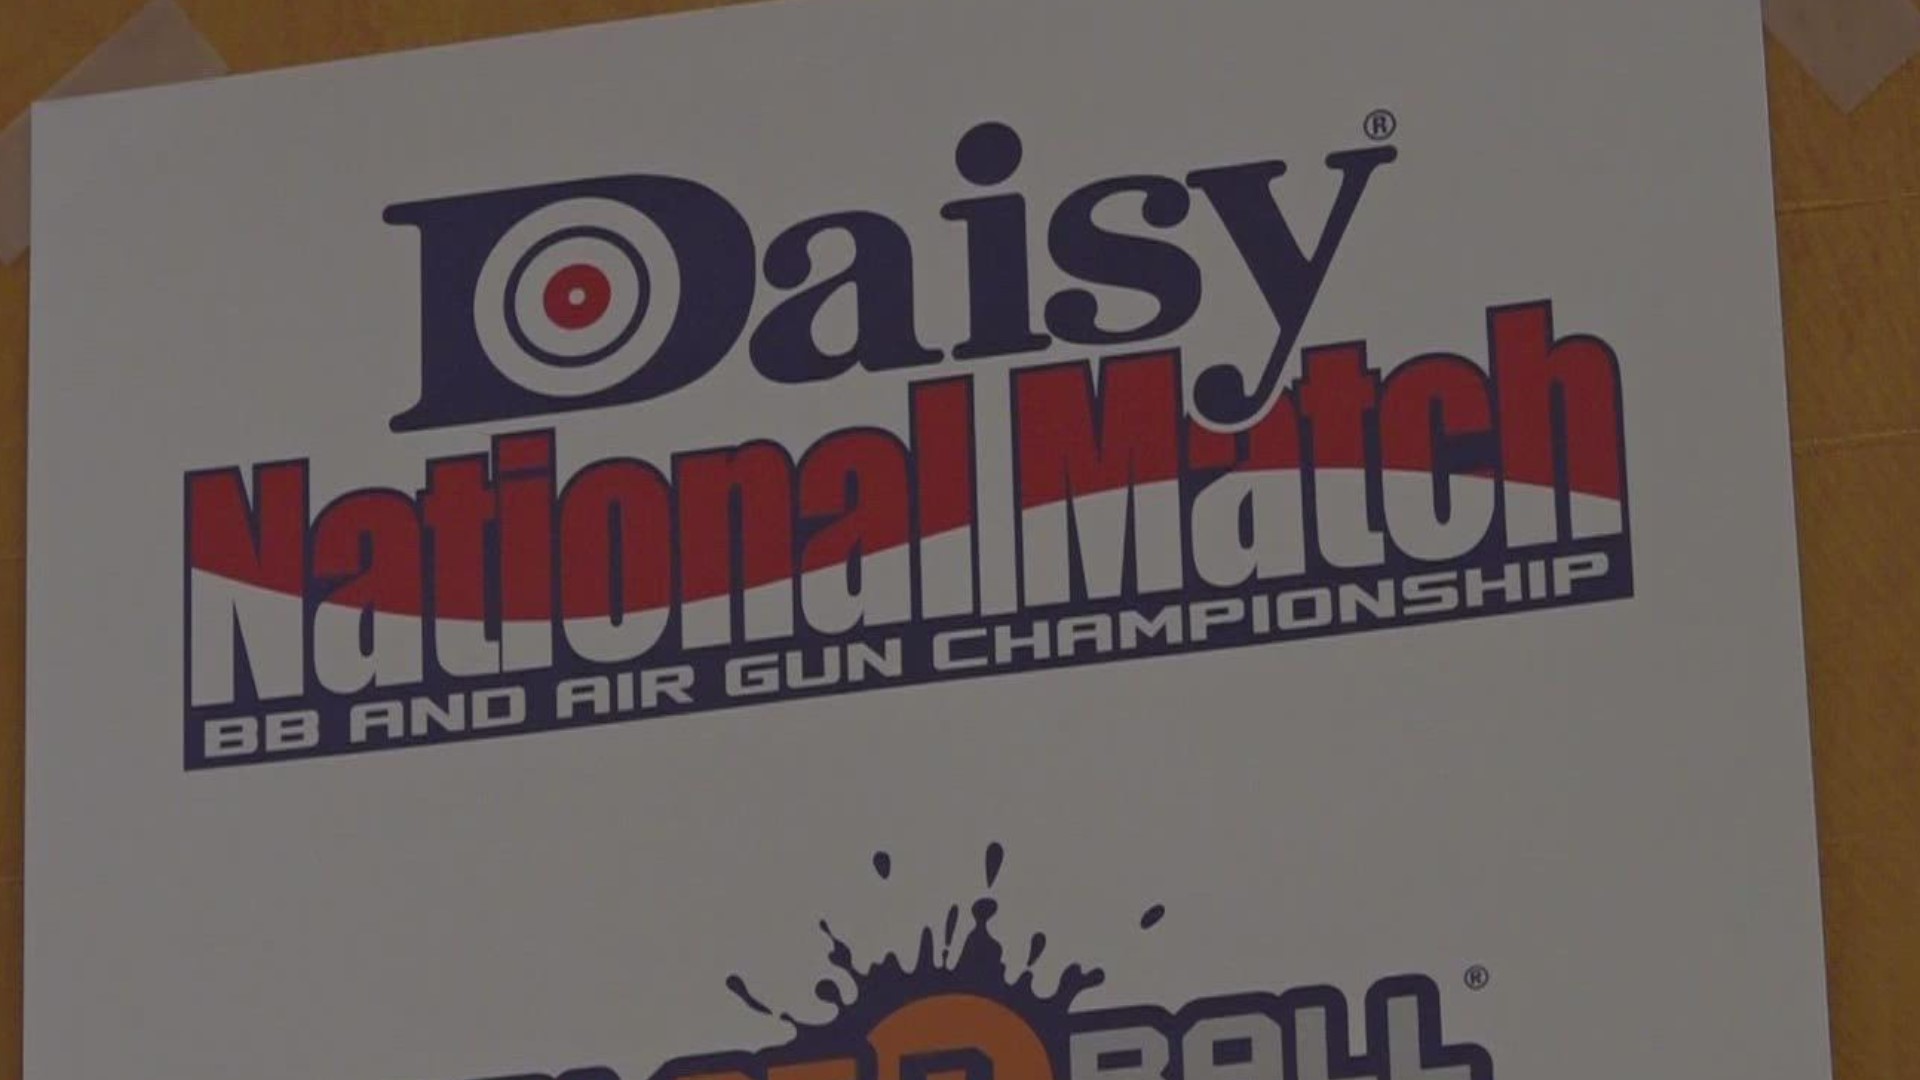 After a two-year hiatus, the Daisy National BB Gun Championship is underway in Rogers with 55 teams coming from 16 states.